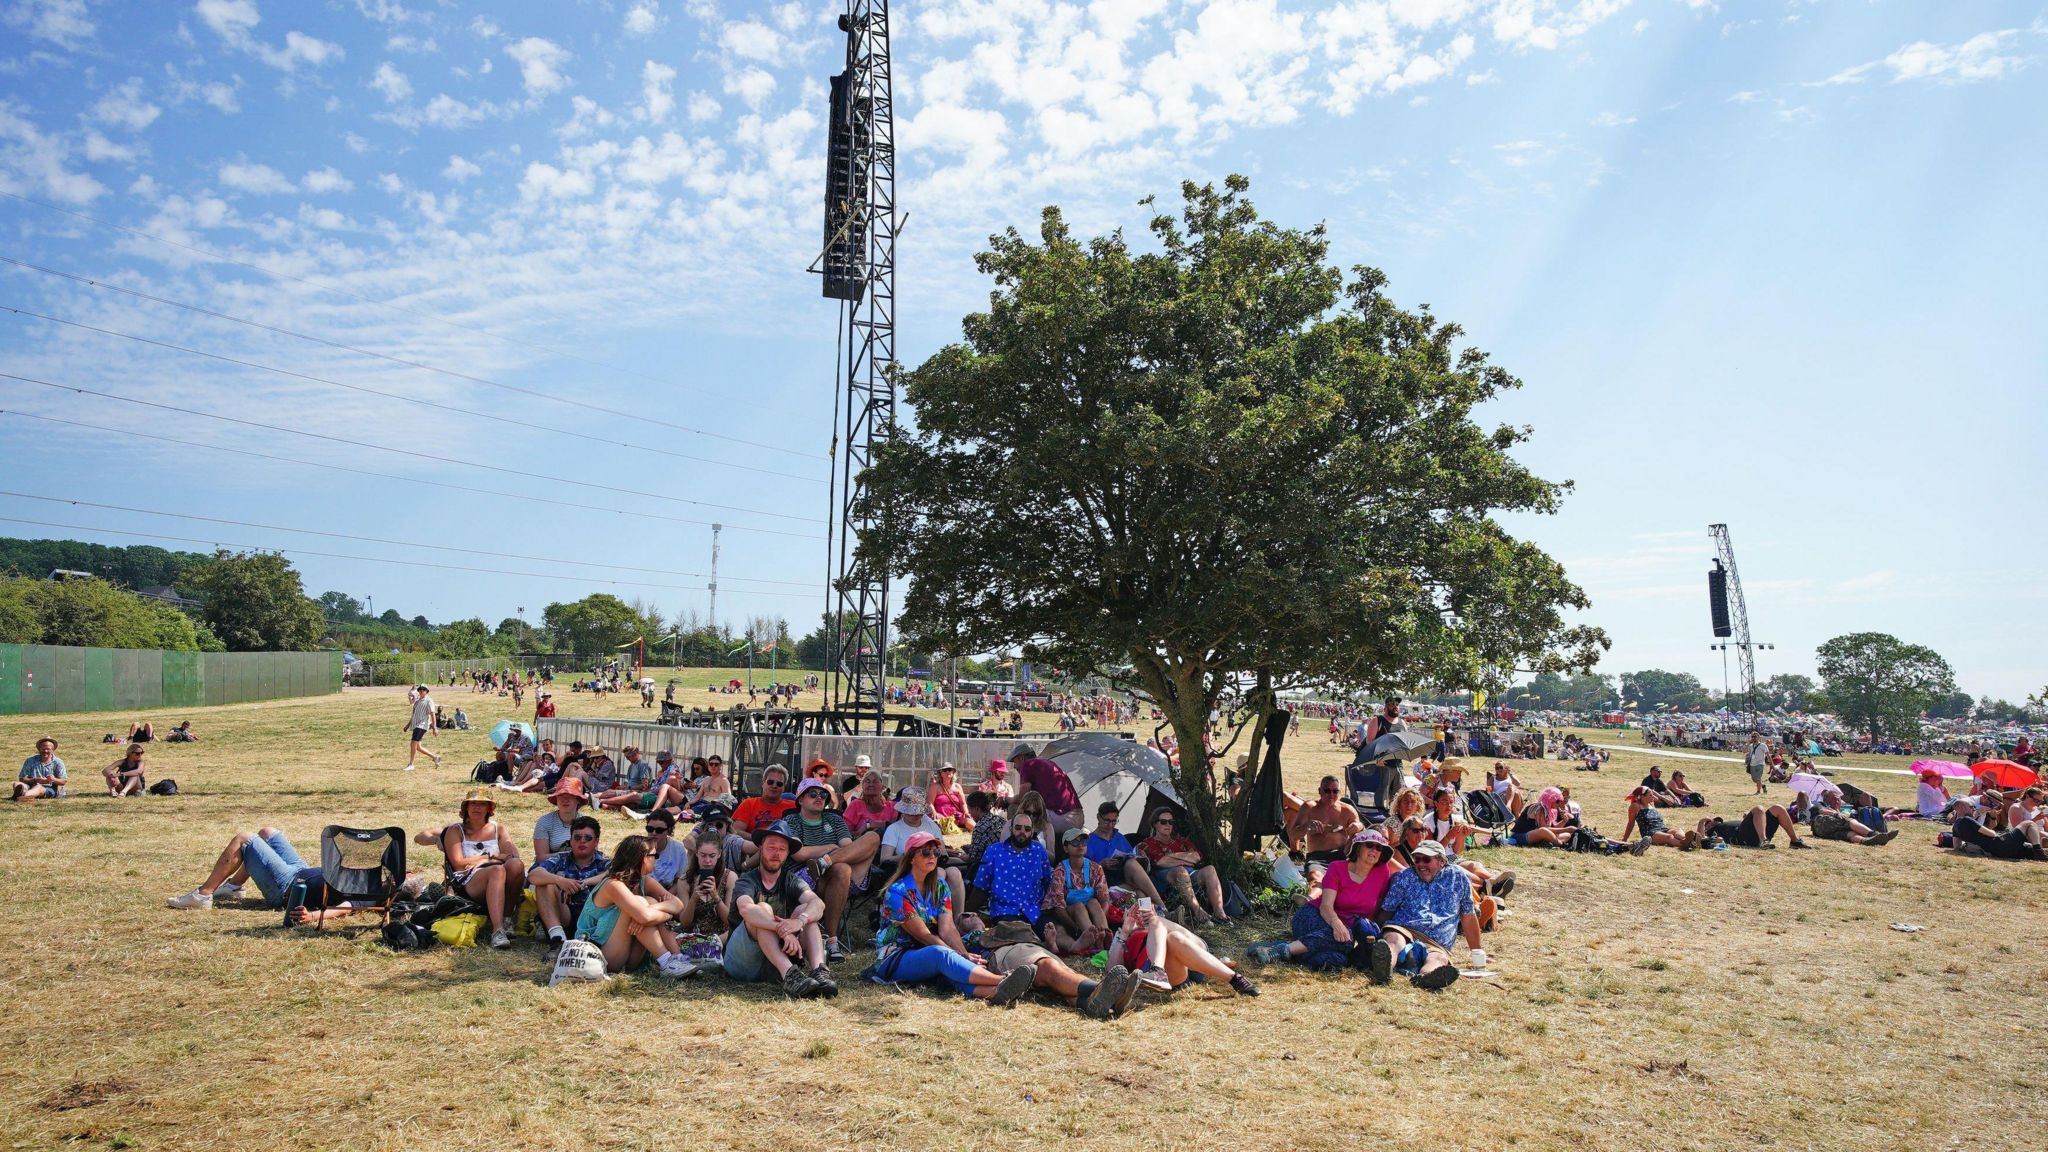 Glastonbury Festival attendees sitting under a tree in the shade on a sunny day